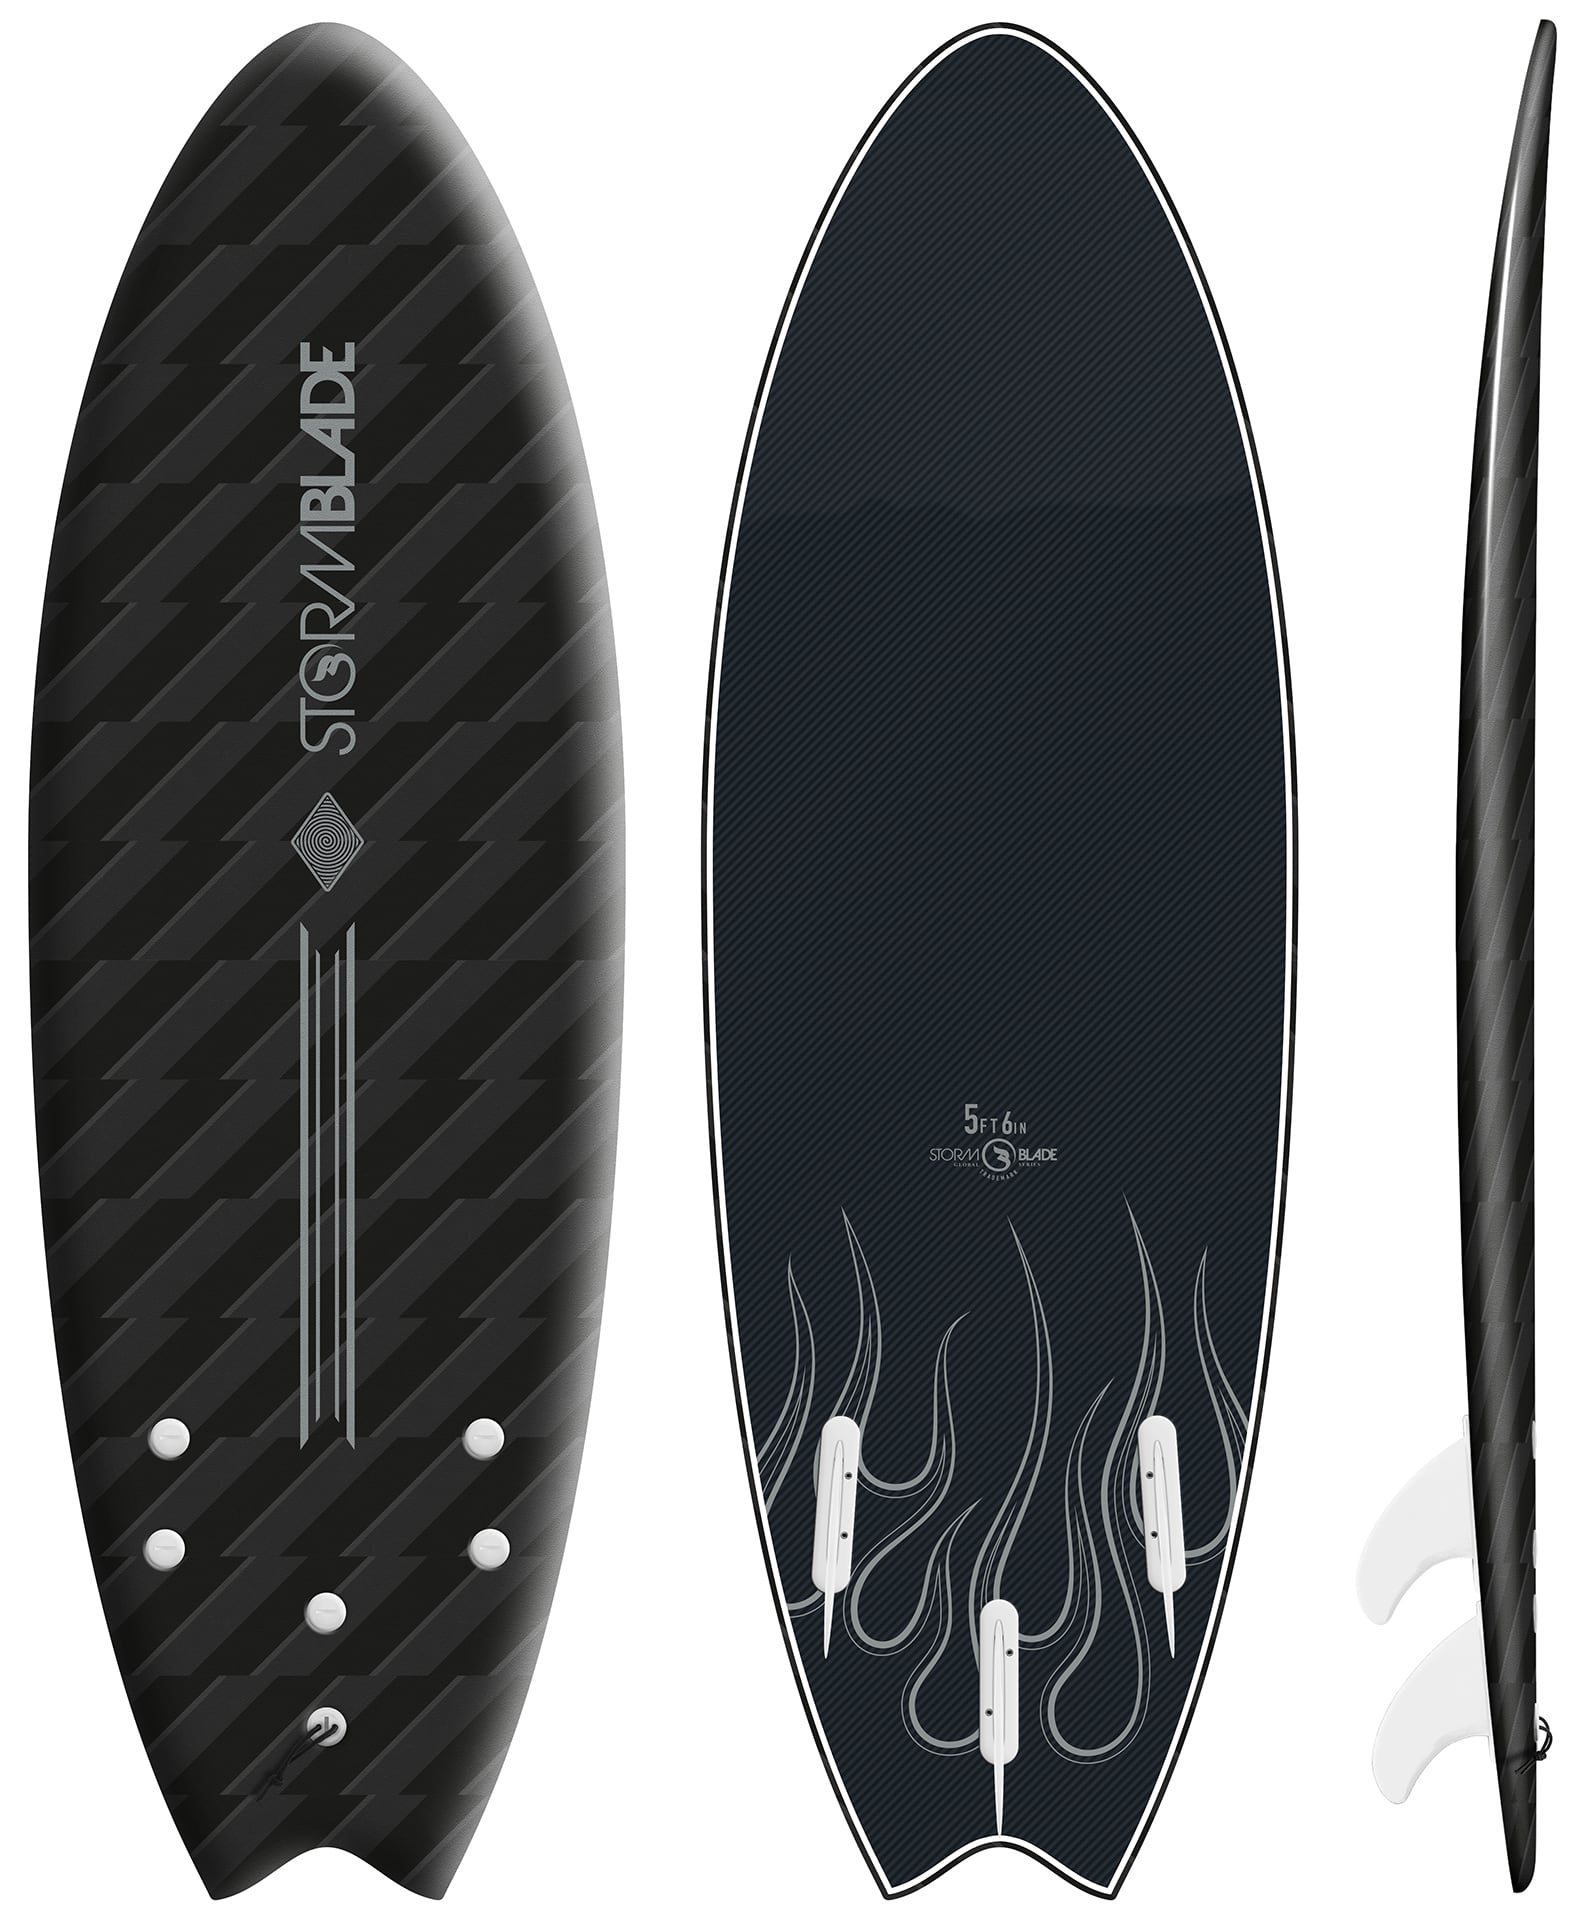 STORM BLADE SURFBOARDS JAPAN | 5ft6 SWALLOW TAIL SURFBOARDS